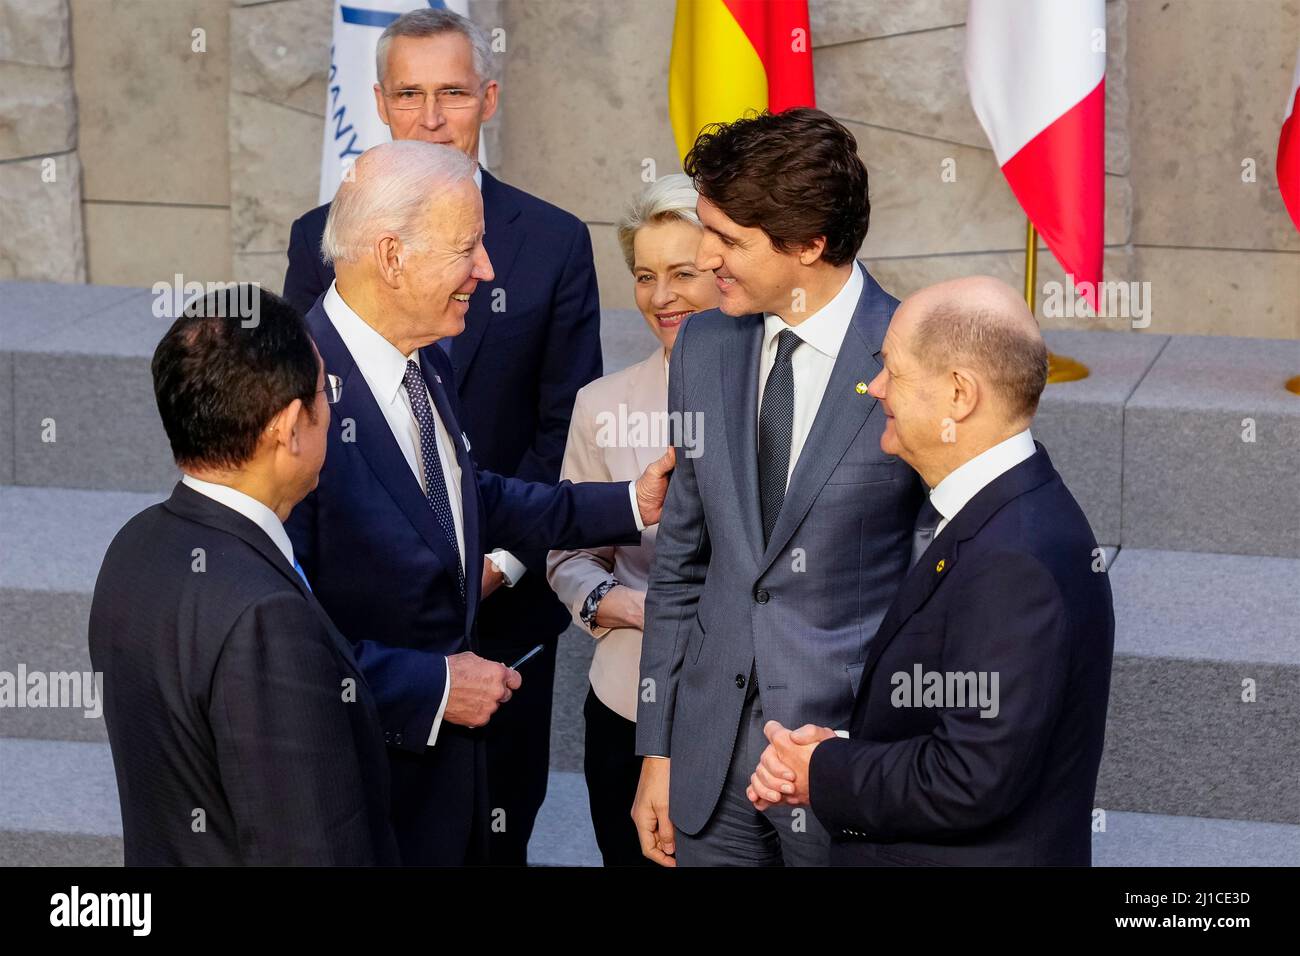 Brussels, Belgium. 24th Mar, 2022. U.S President Joe Biden, left, chats with Canadian Prime Minister Justin Trudeau following a group photo during the emergency meeting of the G7 nations at NATO headquarters, March 24, 2022 in Brussels, Belgium. Standing with Biden from left to right are: Japanese Prime Minister Fumio Kishida, President Joe Biden, NATO Secretary General Jens Stoltenberg, European Commission President Ursula von der Leyen, Canadian Prime Minister Justin Trudeau and German Chancellor Olaf Scholz. Credit: Adam Schultz/White House Photo/Alamy Live News Stock Photo